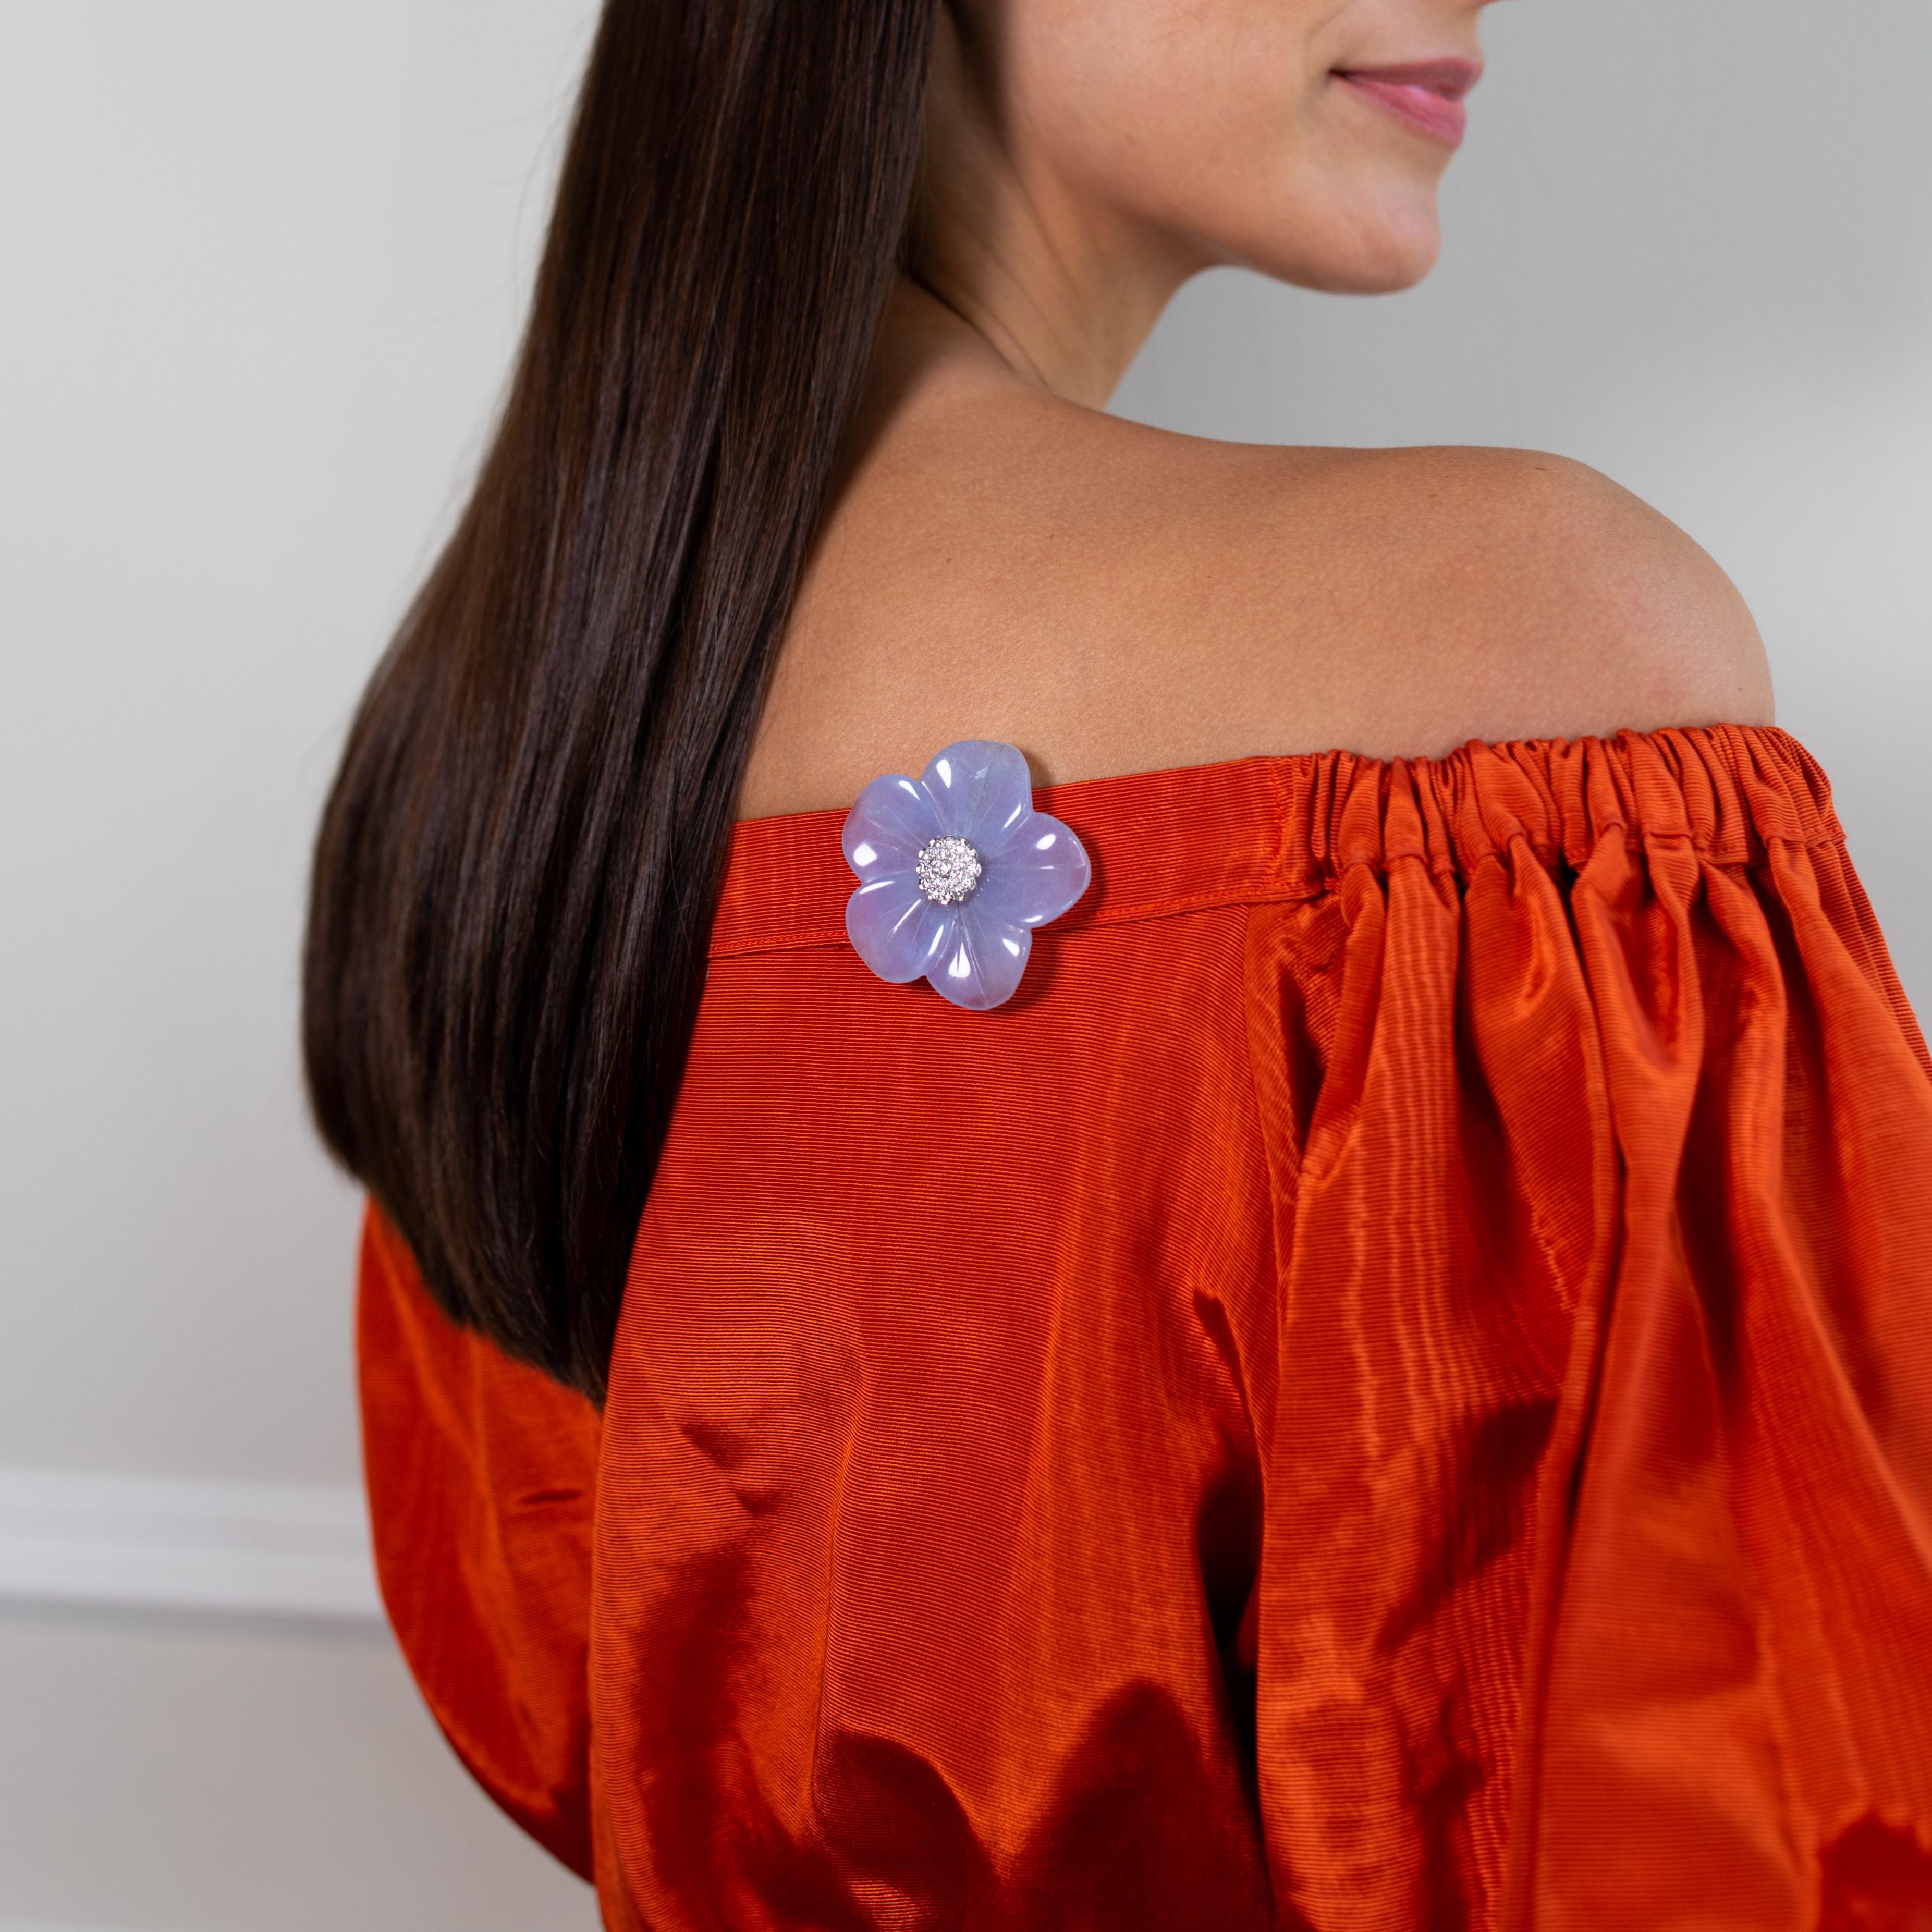 There's something so ethereal about the colour of this blue chalcedony flower brooch that it instantly captures the eye – and heart! Sizable yet delicate, this charming bloom boasts five articulated petals carved in the dreamiest lavender chalcedony